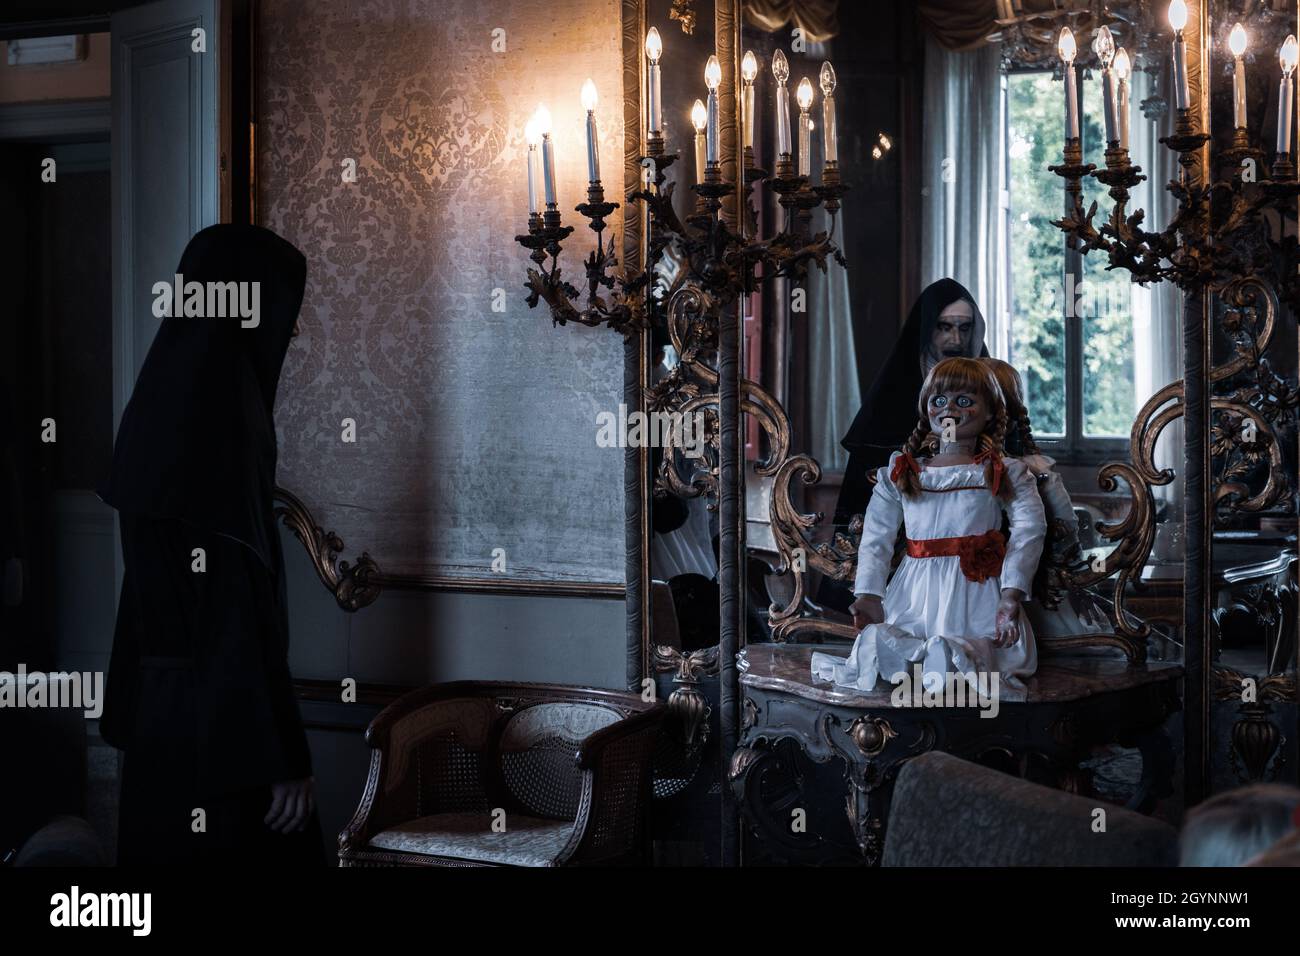 SAN POLO DI PIAVE, ITALY - Jul 17, 2021: A dark scary horror scene with  haunted dolls and nuns for the Dark Fest in San Polo di Piave, Italy Stock  Photo - Alamy